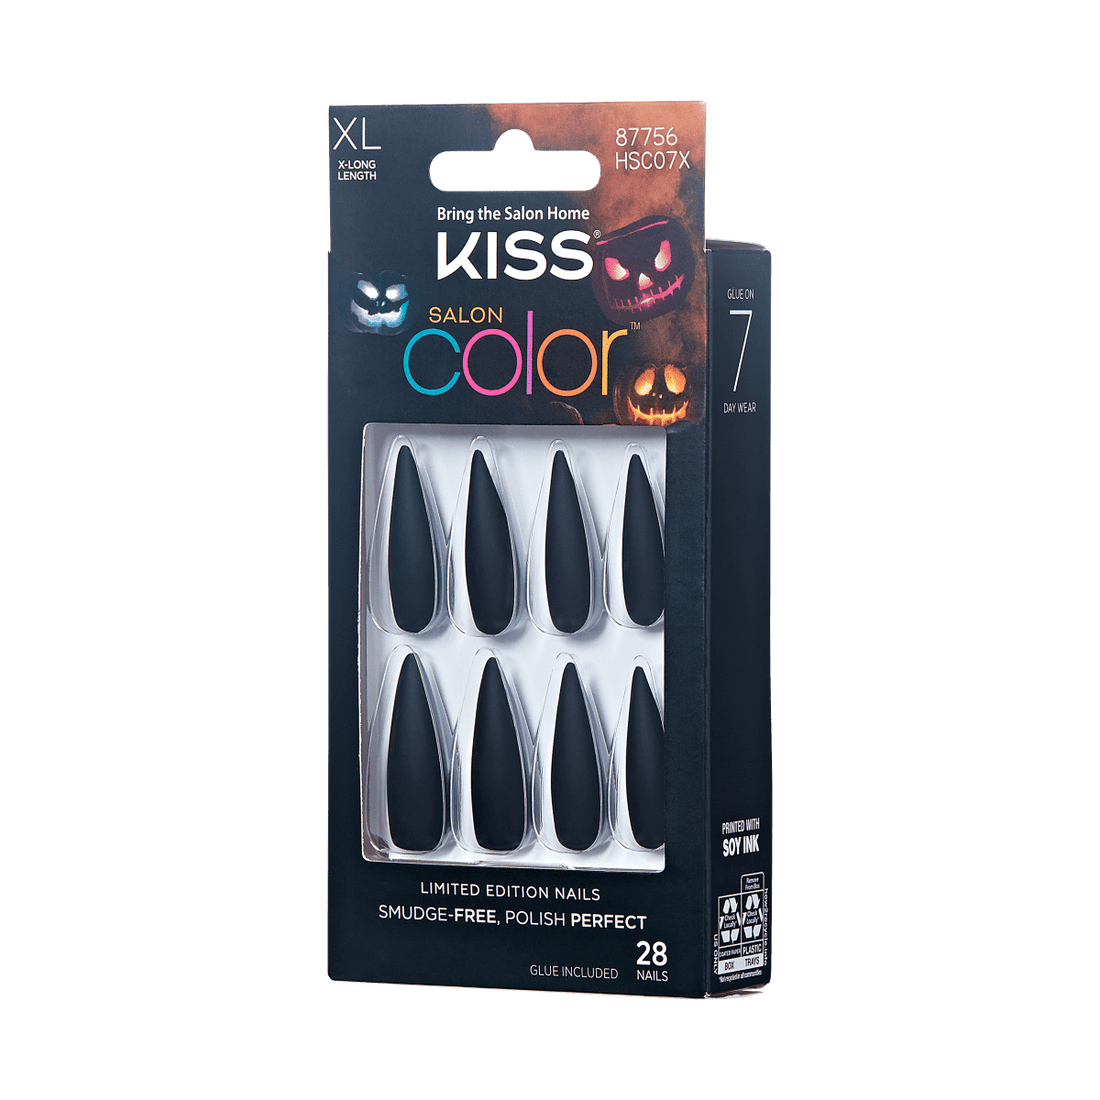 KISS Halloween Salon Color Nails - Let The Game Begin